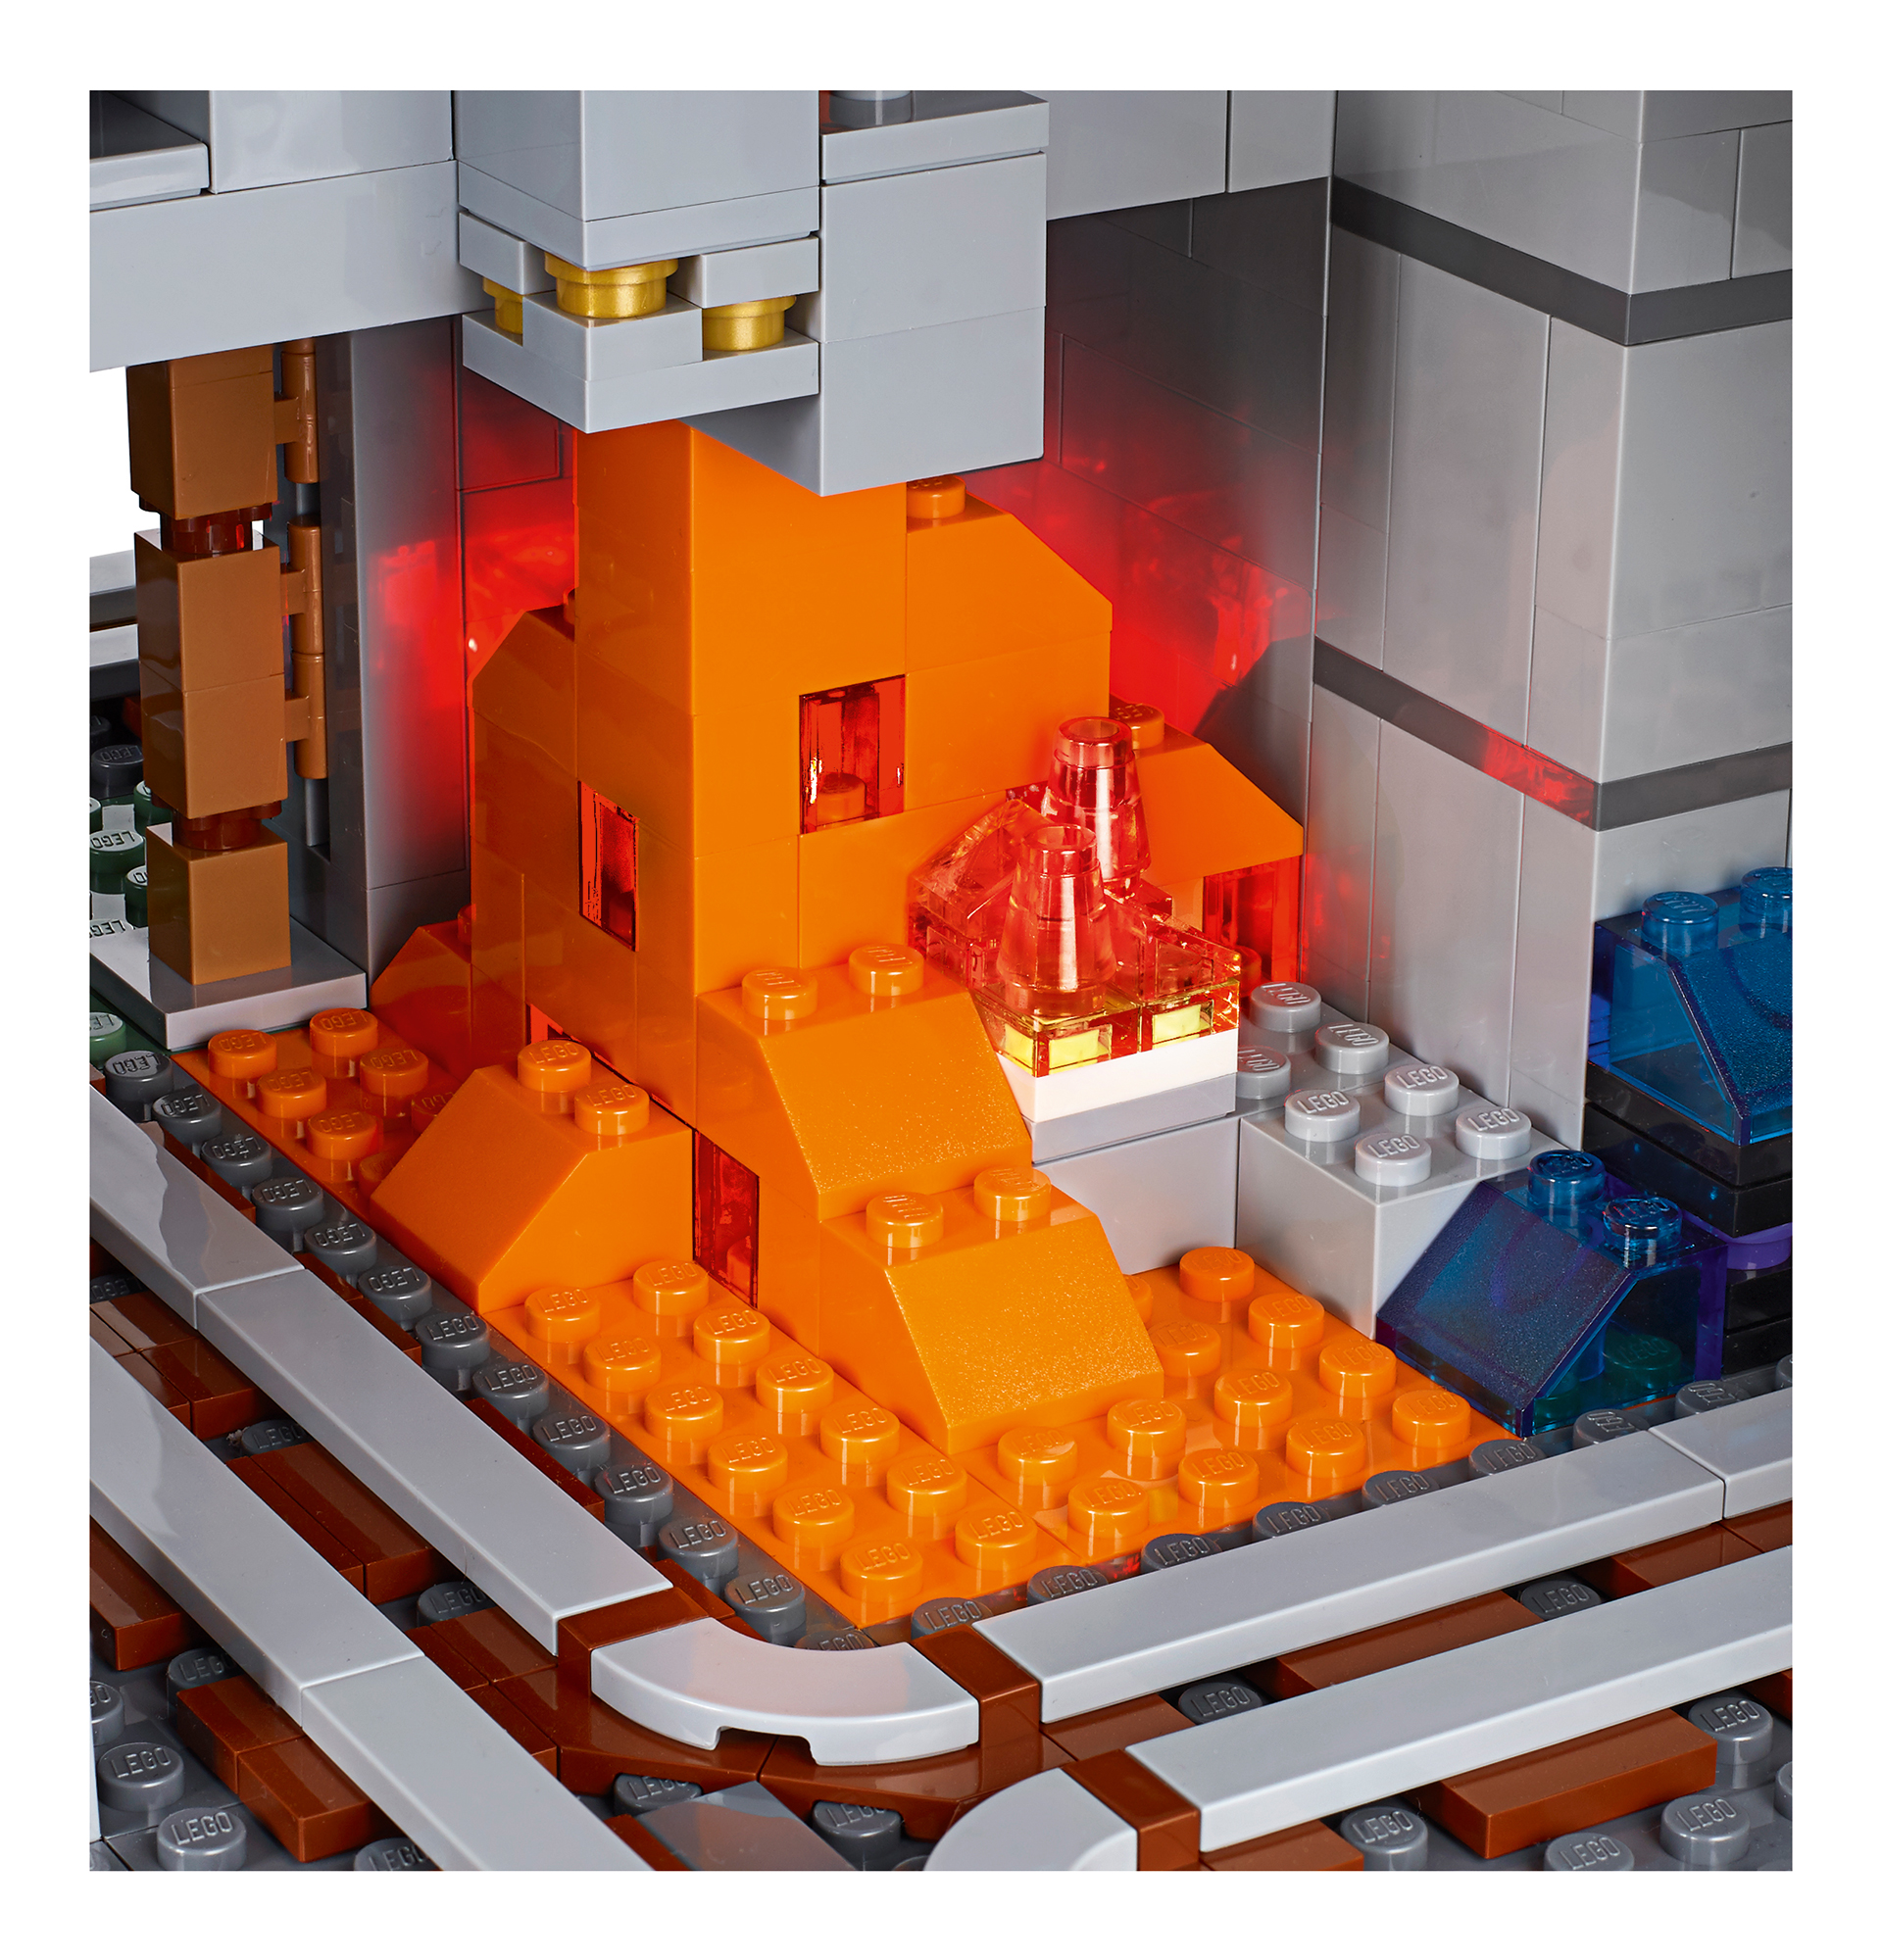 The Mountain Cave Is The Biggest LEGO Minecraft Set Yet